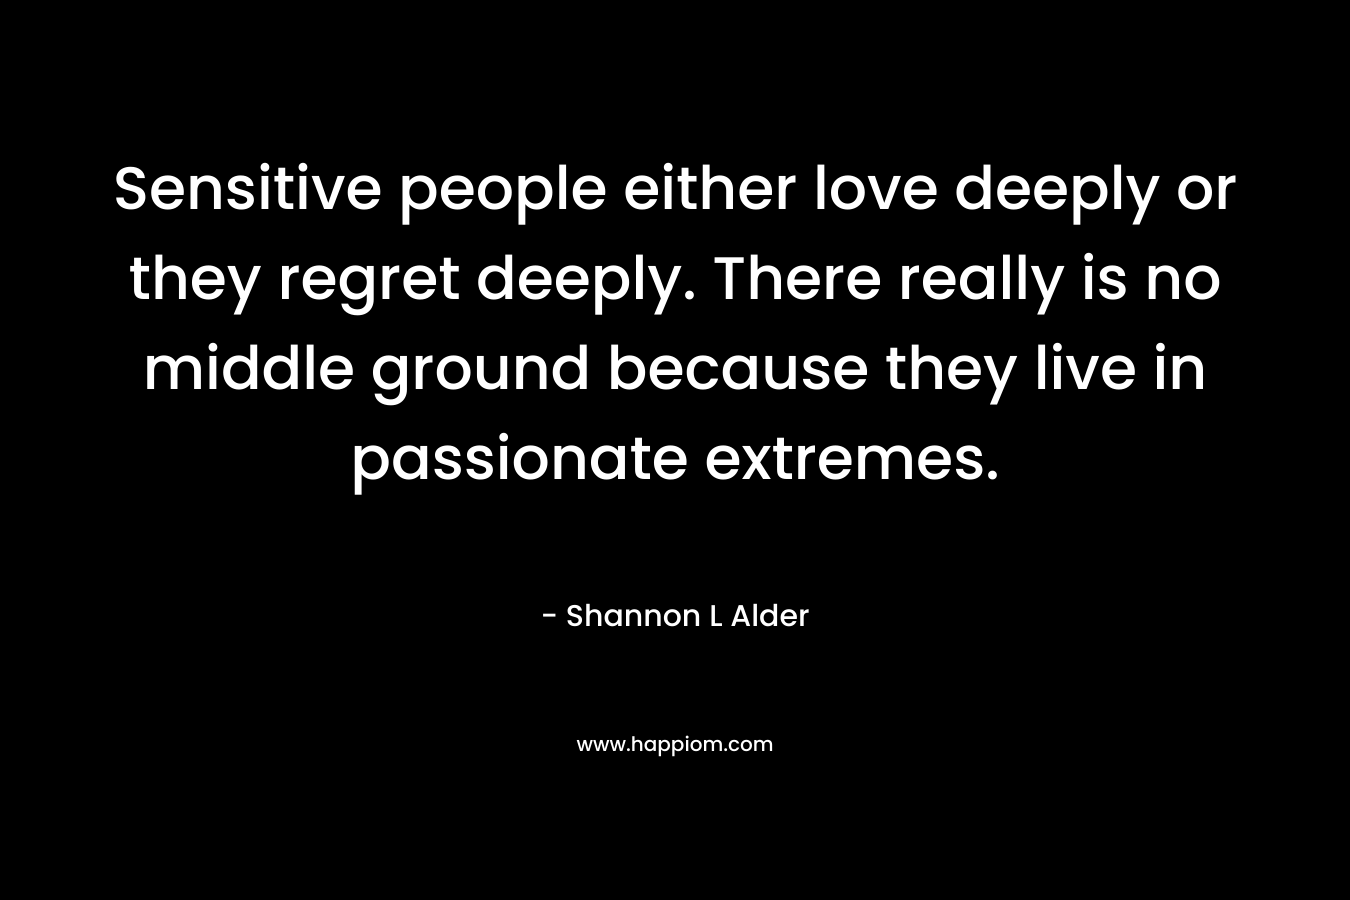 Sensitive people either love deeply or they regret deeply. There really is no middle ground because they live in passionate extremes. – Shannon L Alder